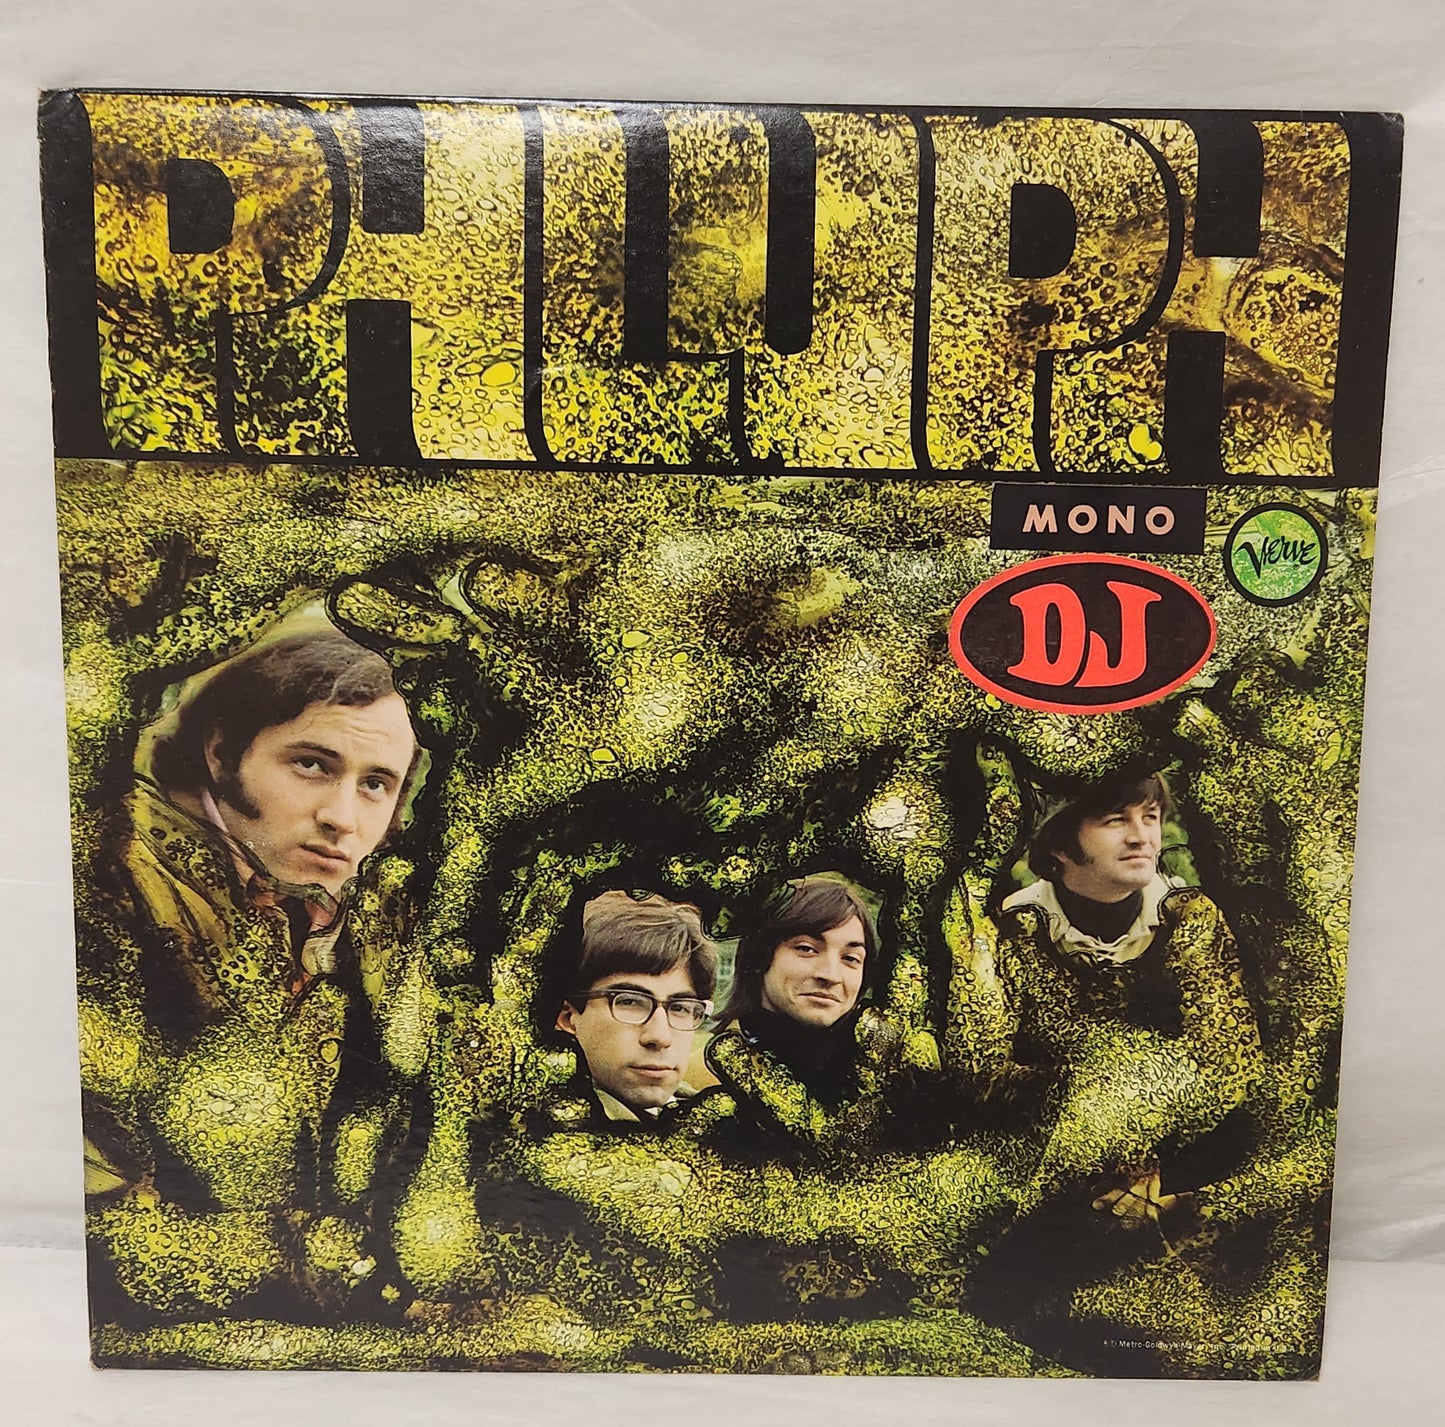 Phluph Self-Titled 1968 Psychedelic Rock DJ Promo Record Album